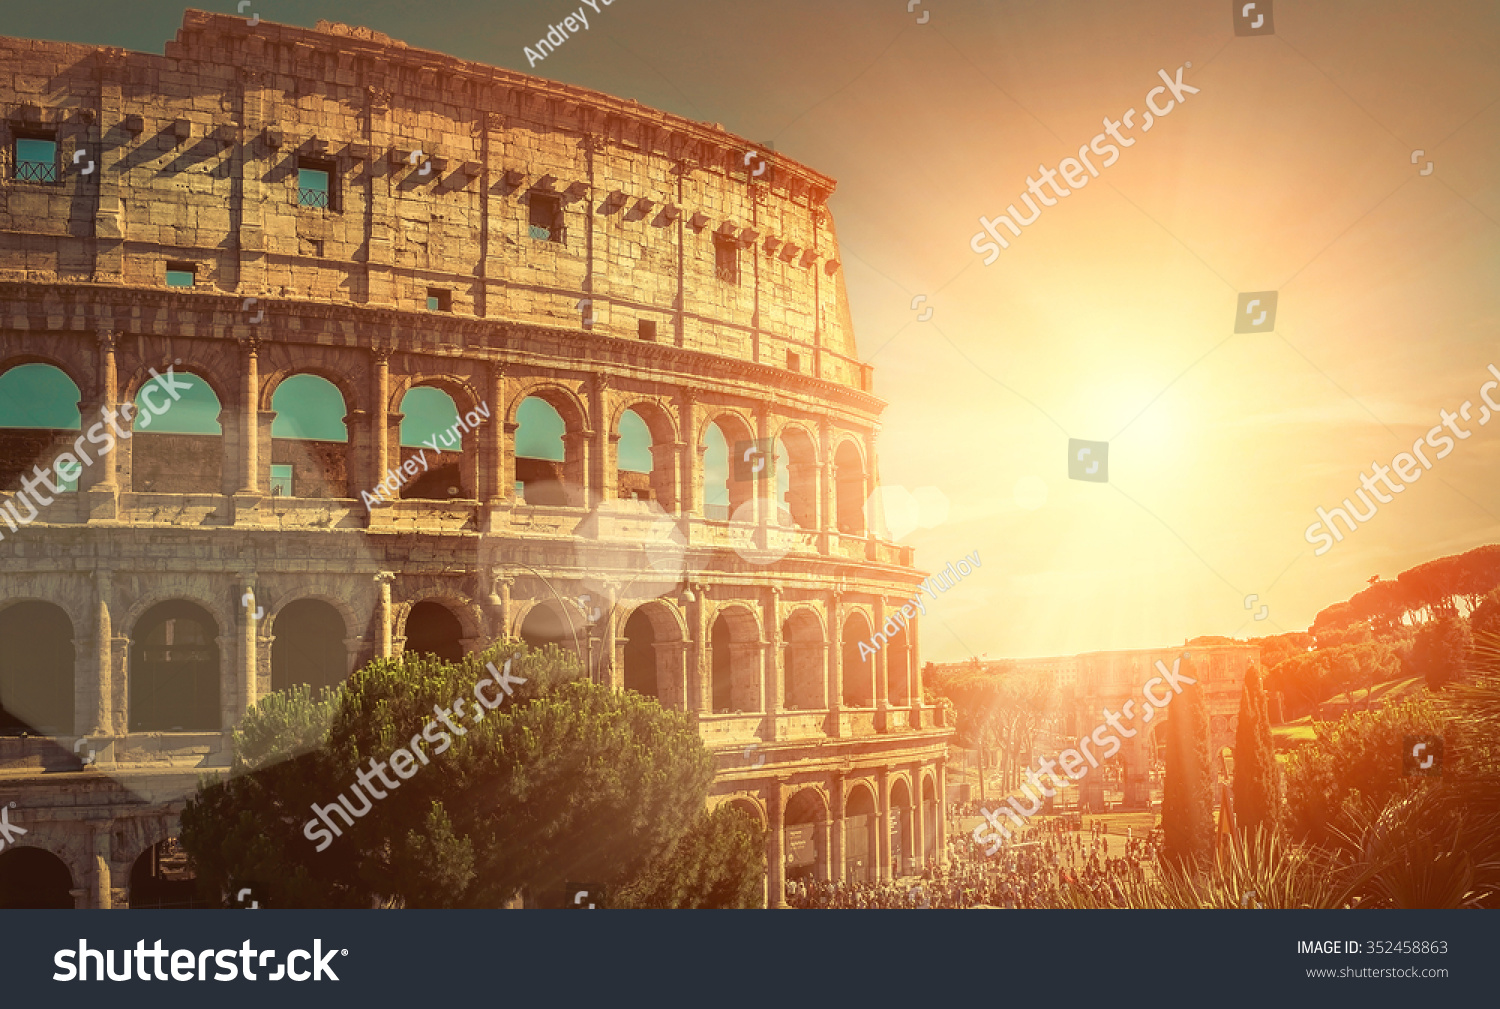 PowerPoint Template ancient roman one of (kmjlmppnk)